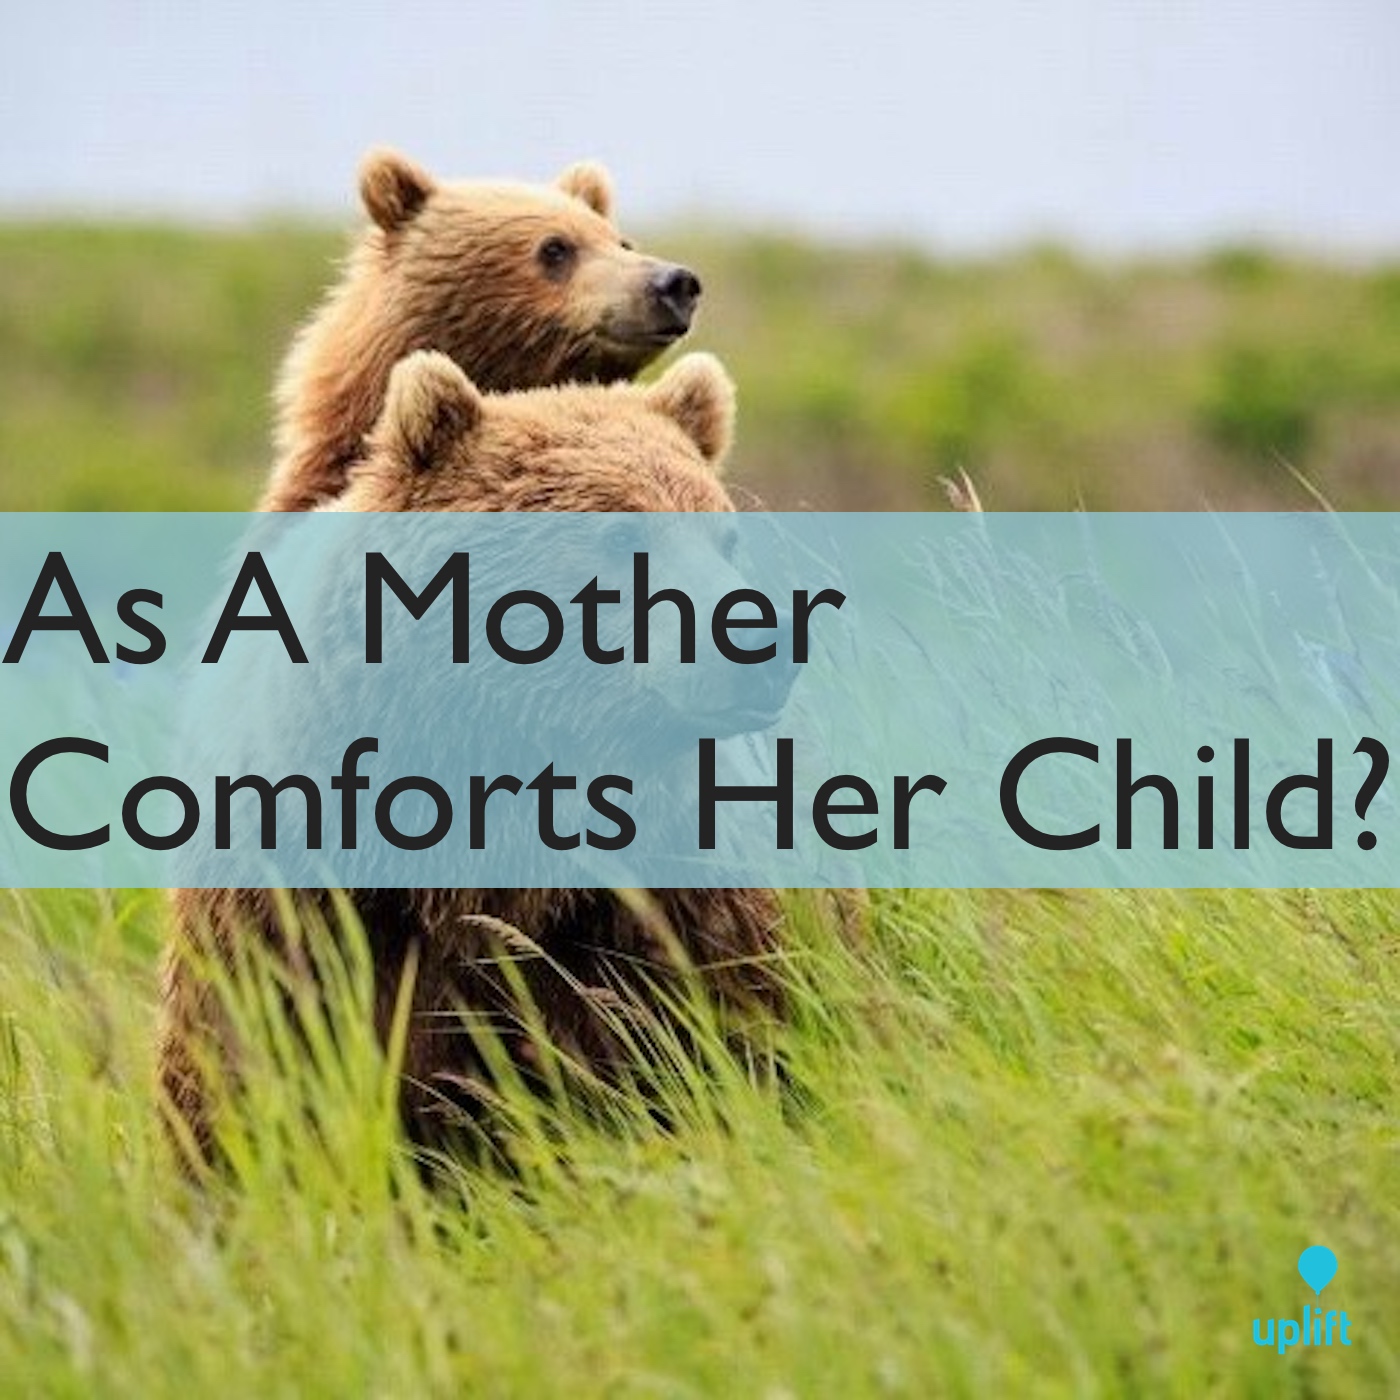 Episode 54: As A Mother Comforts Her Child?